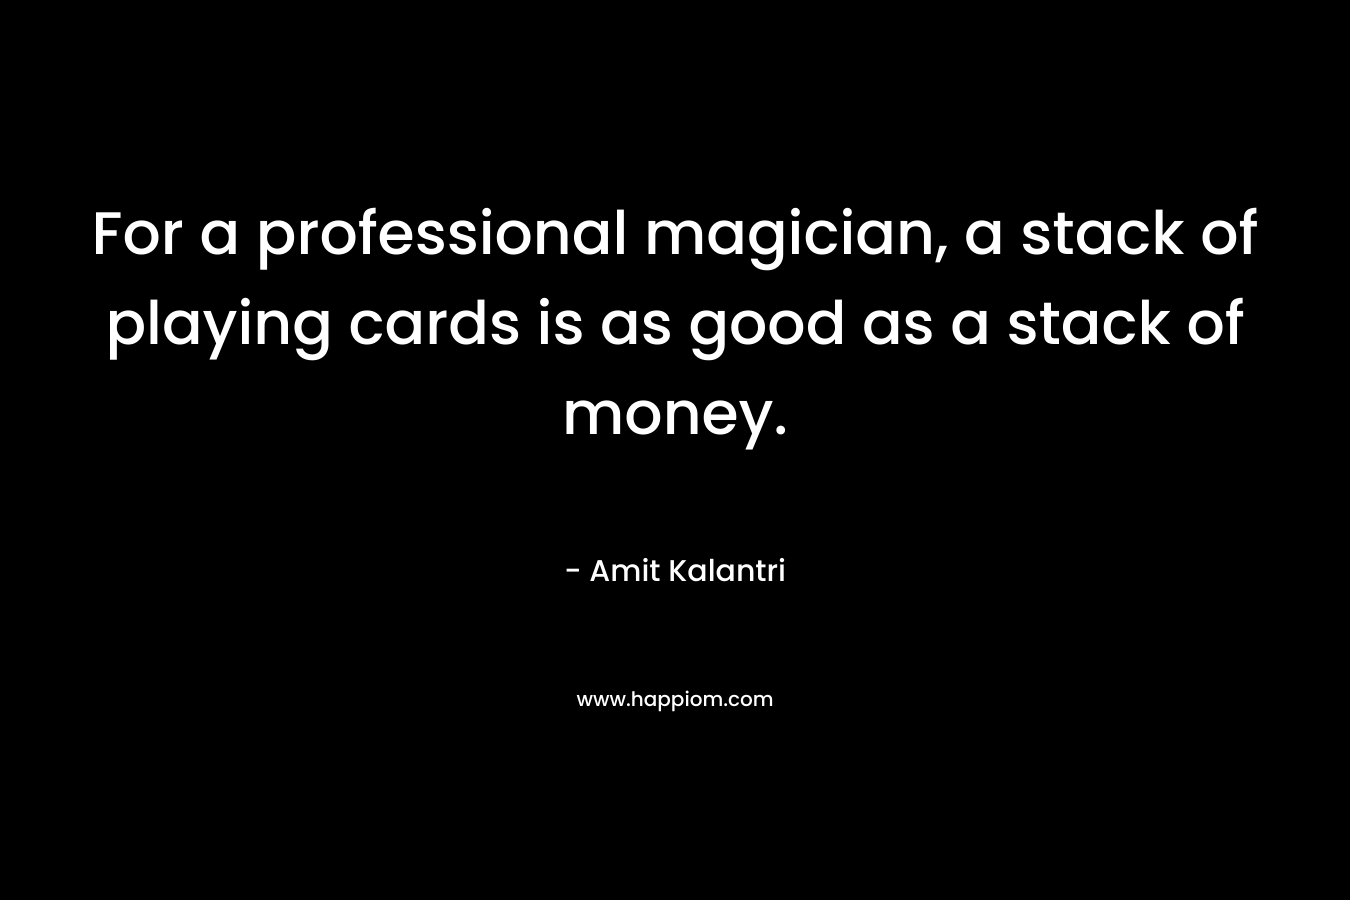 For a professional magician, a stack of playing cards is as good as a stack of money.